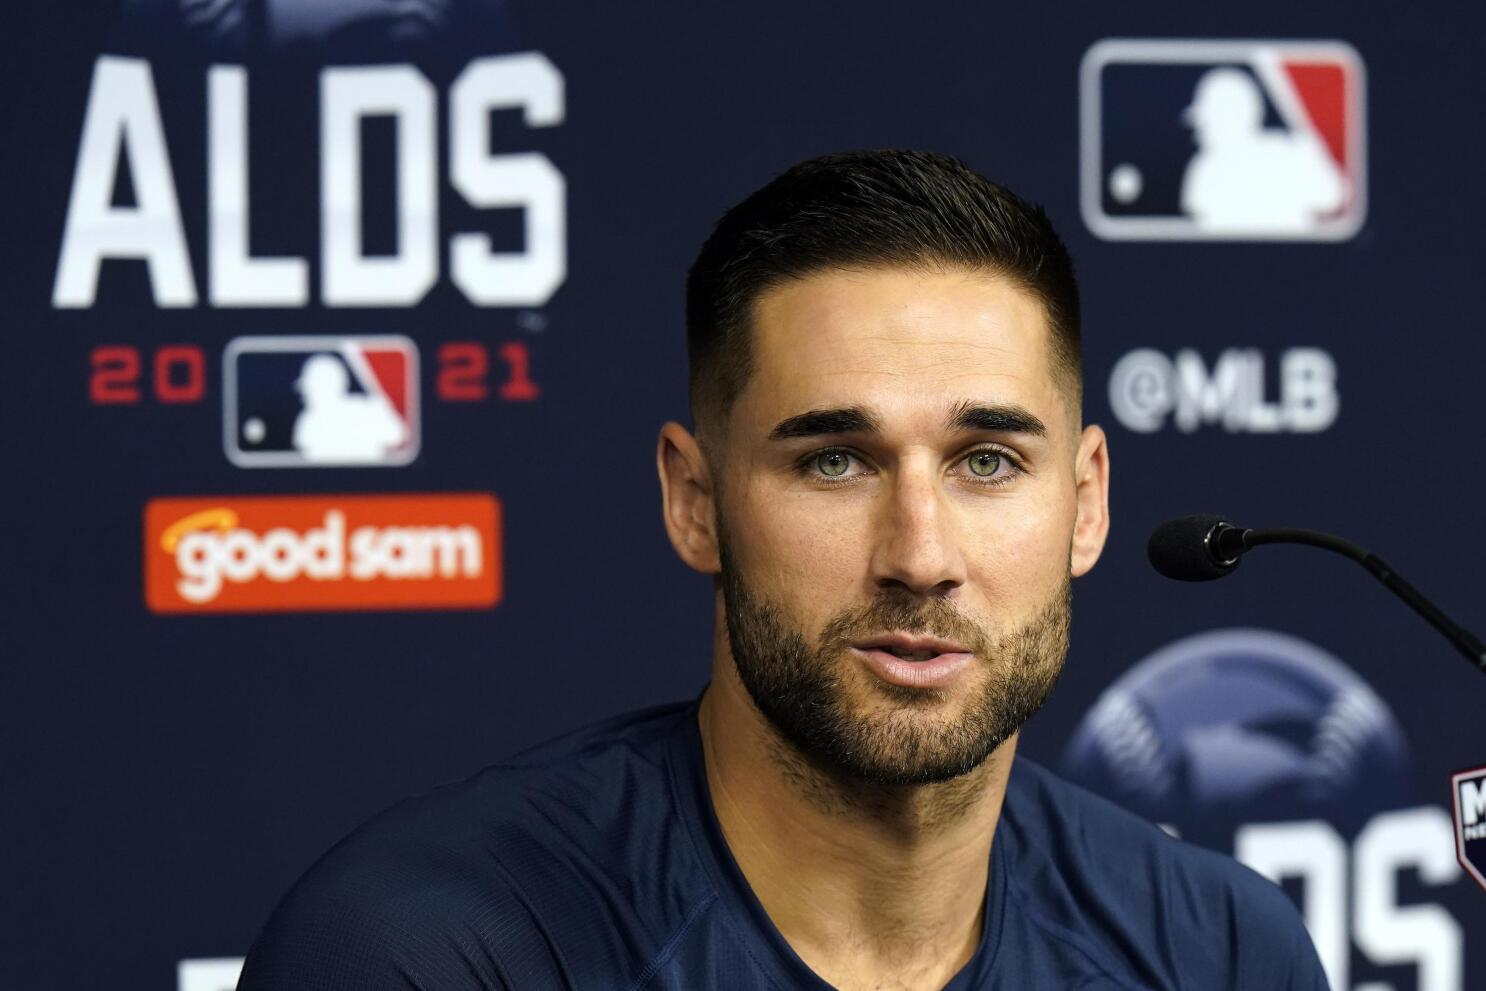 World Series 2018: Chris Taylor's eyebrows are the Dodgers' best